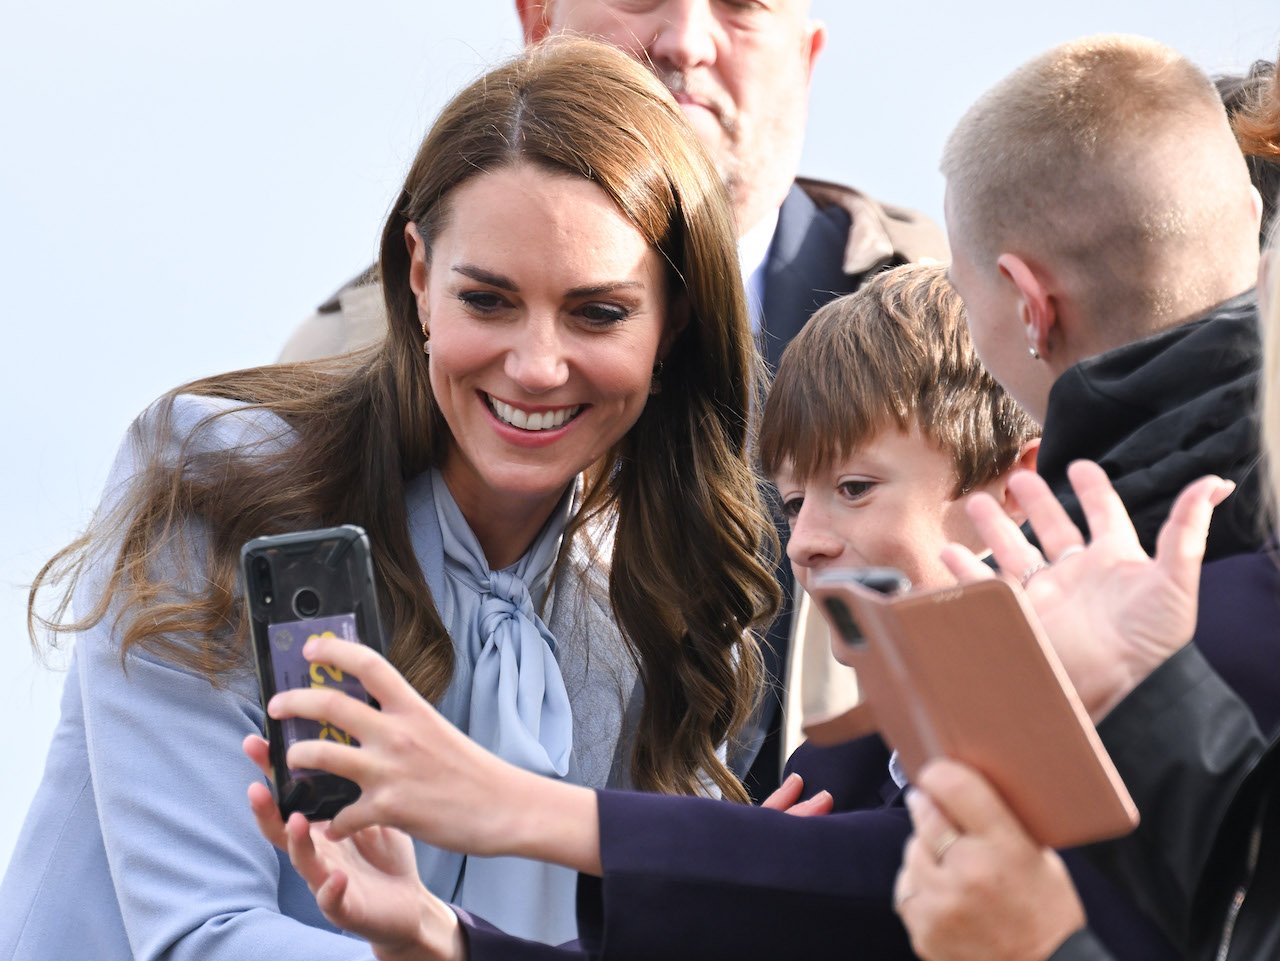 Prince William, Prince of Wales, and Kate Middleton, Princess of Wales, meet the public during a visit to Carrickfergus on 6th October 2022, in Carrickfergus, Northern Ireland.